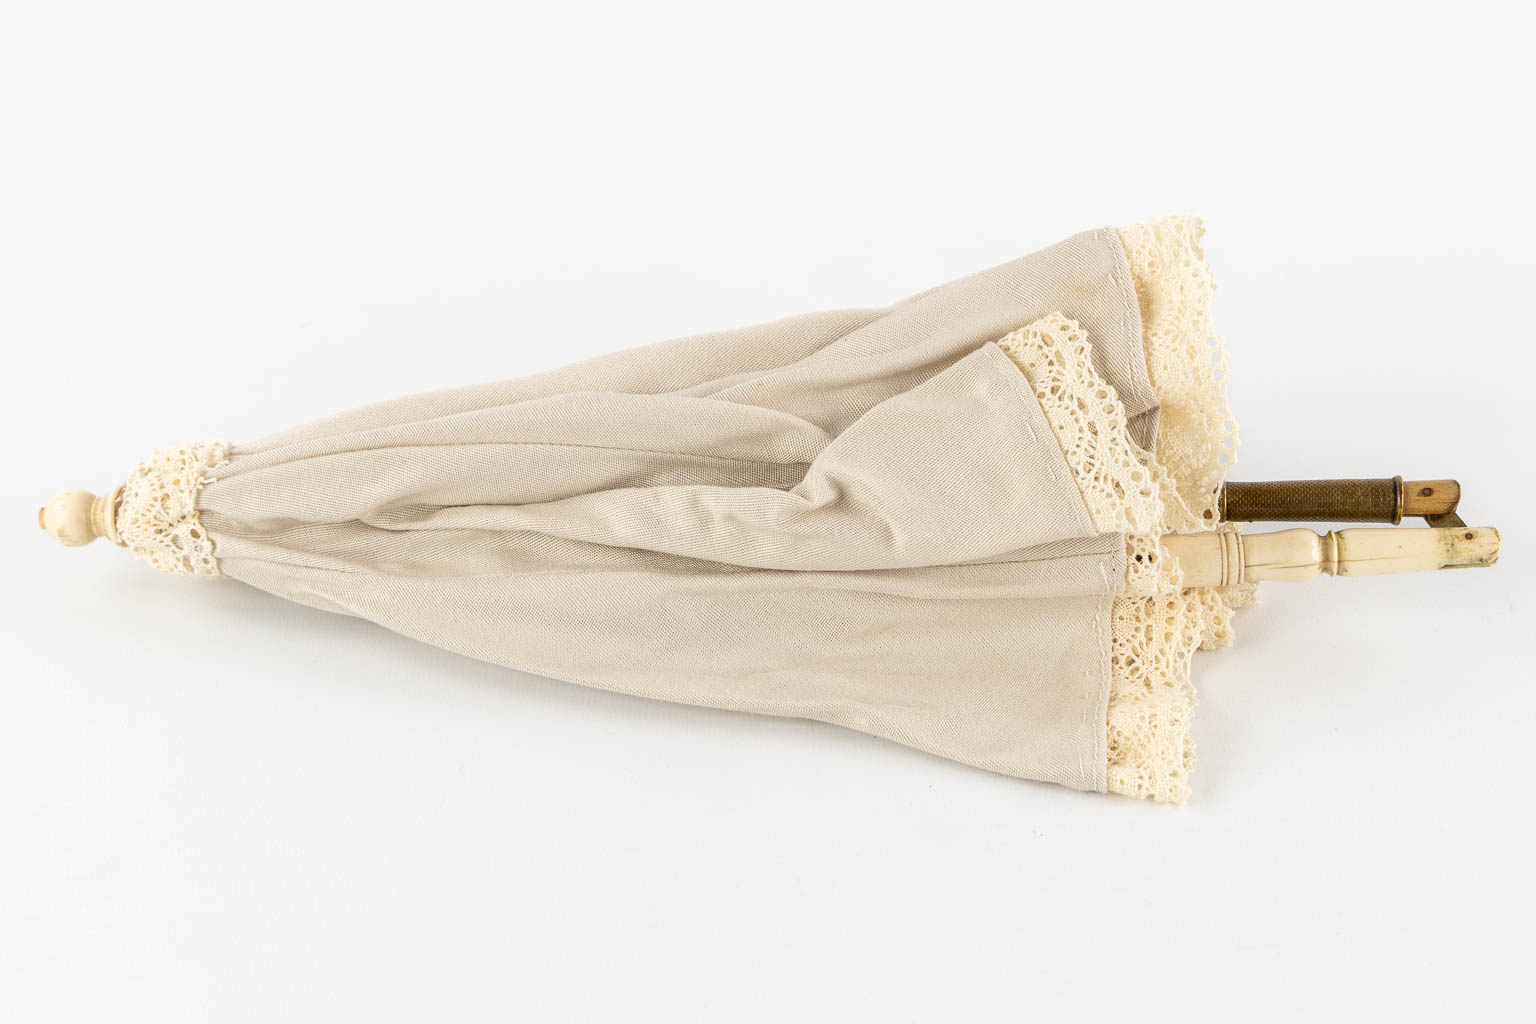 A sunshade with ivory handle, France, 19th C. (L:60 cm) - Image 11 of 11